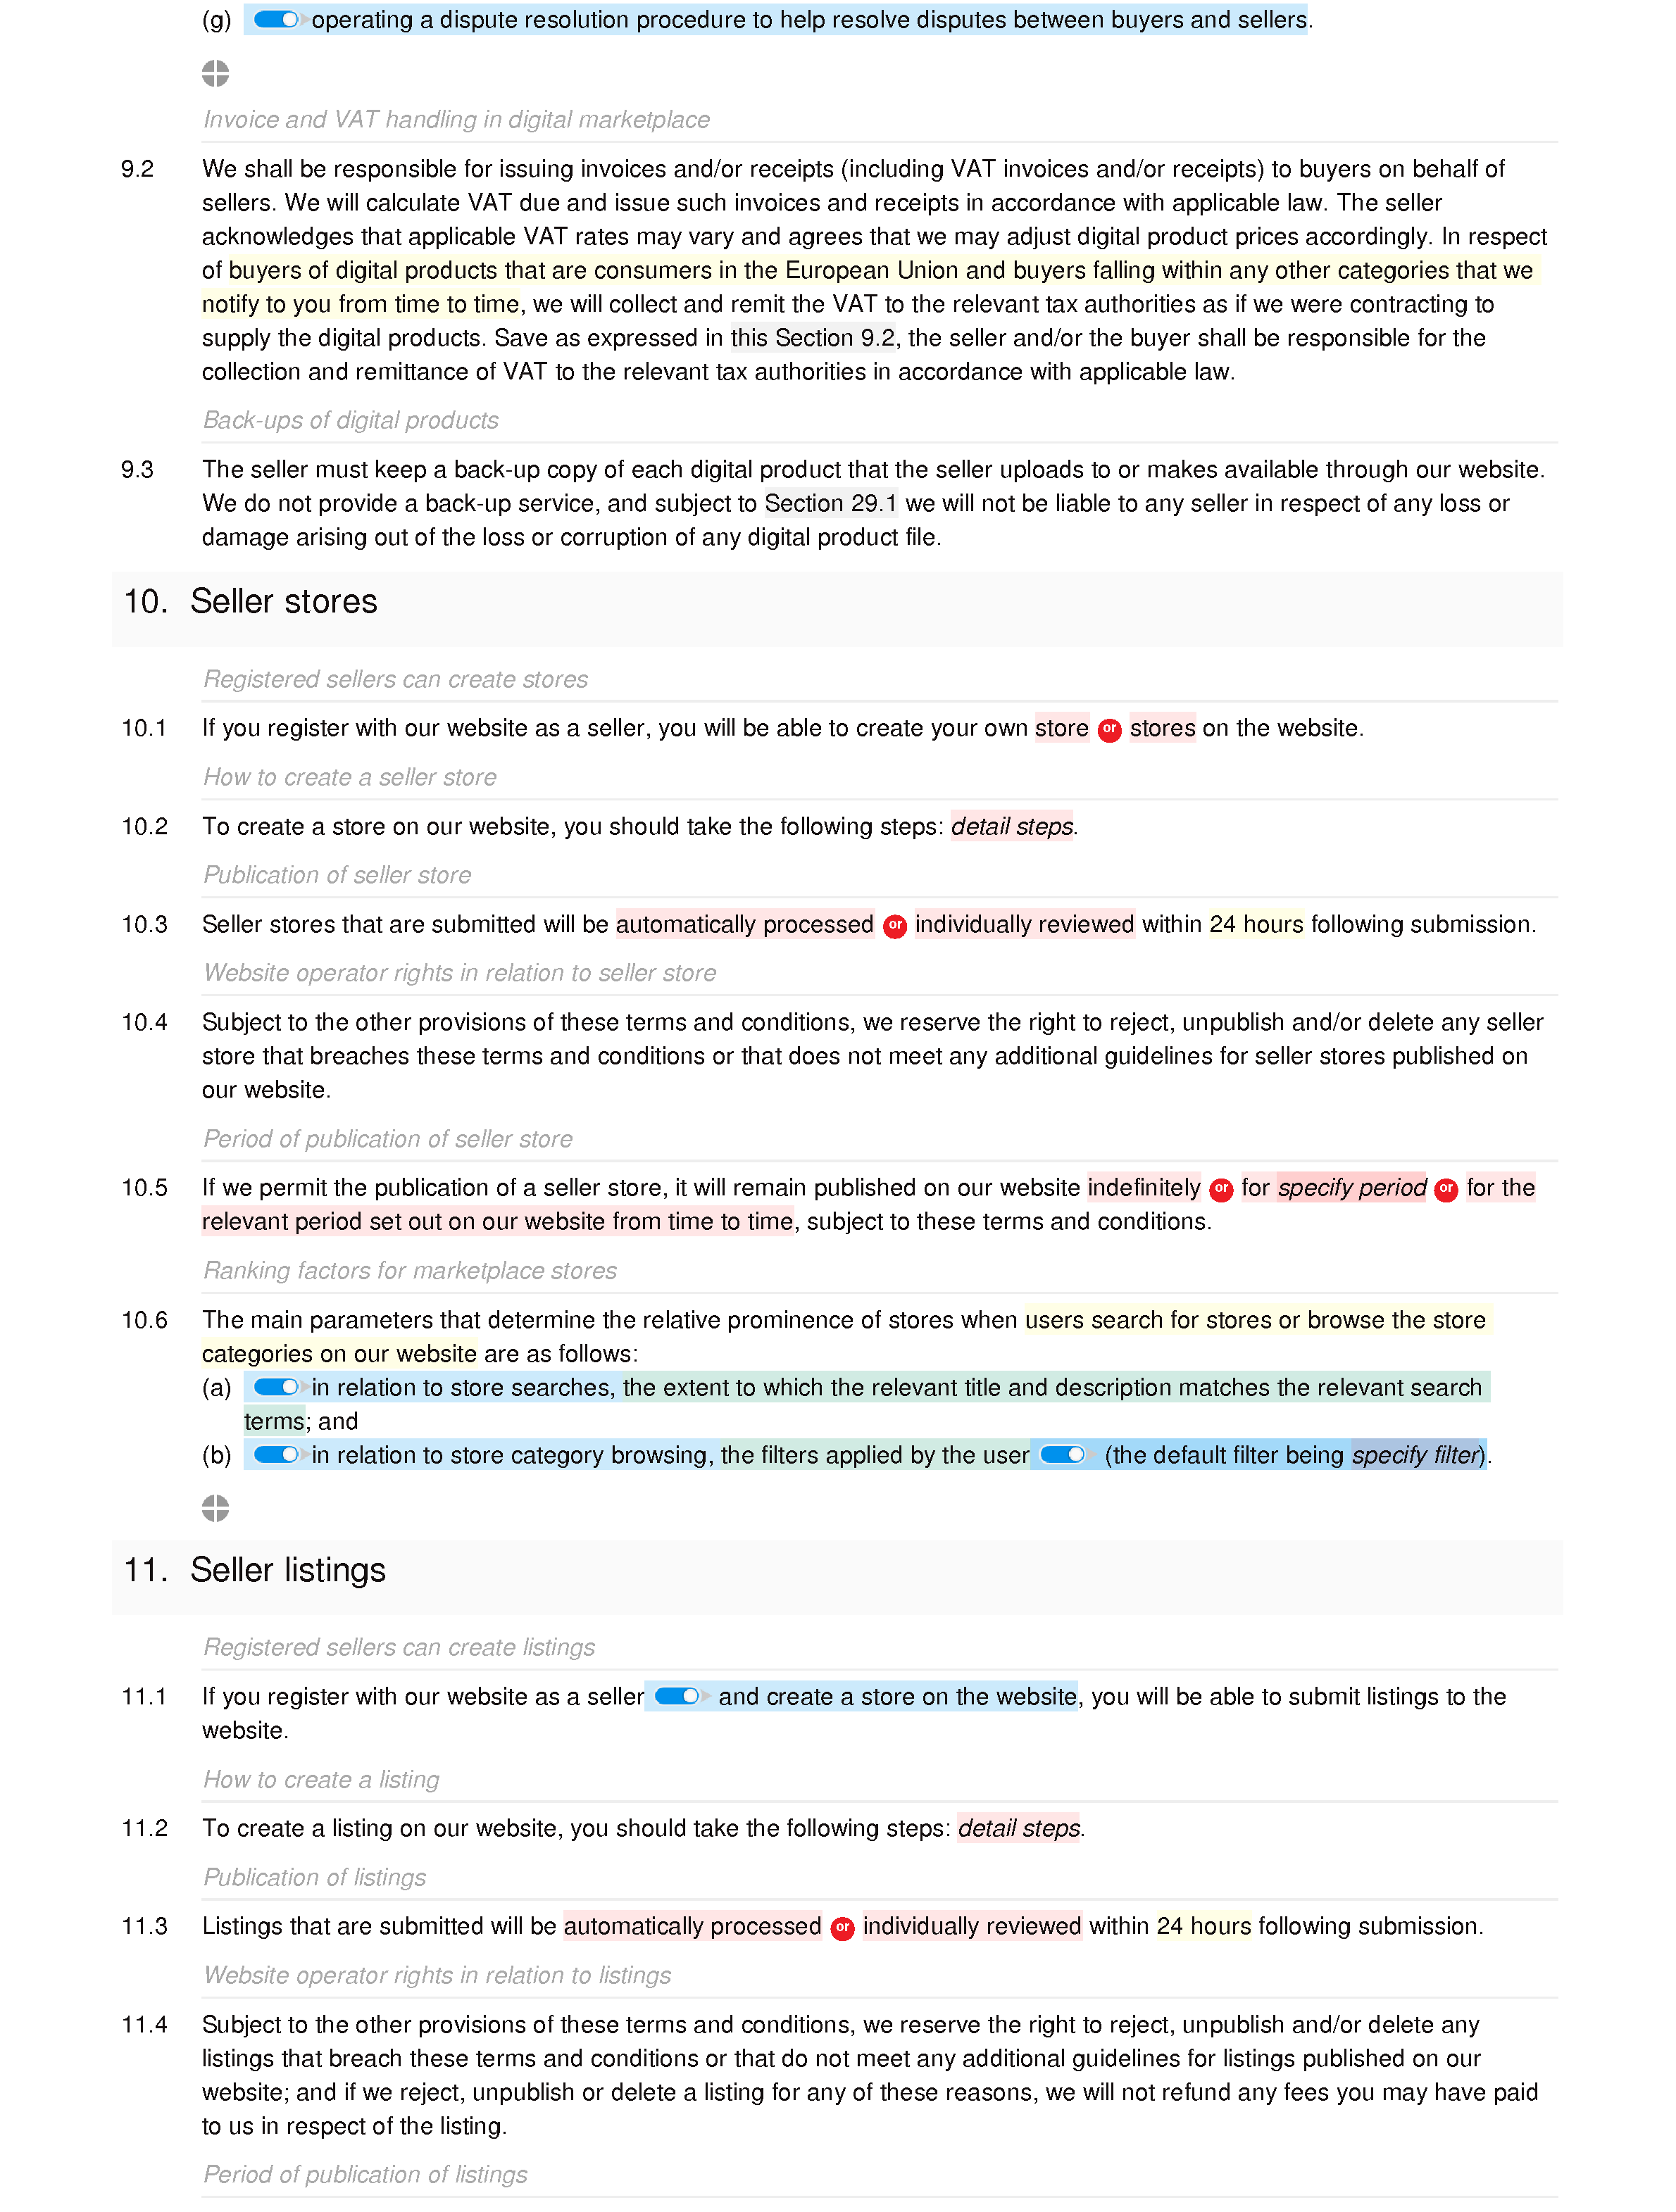 Digital marketplace website terms and conditions document editor preview